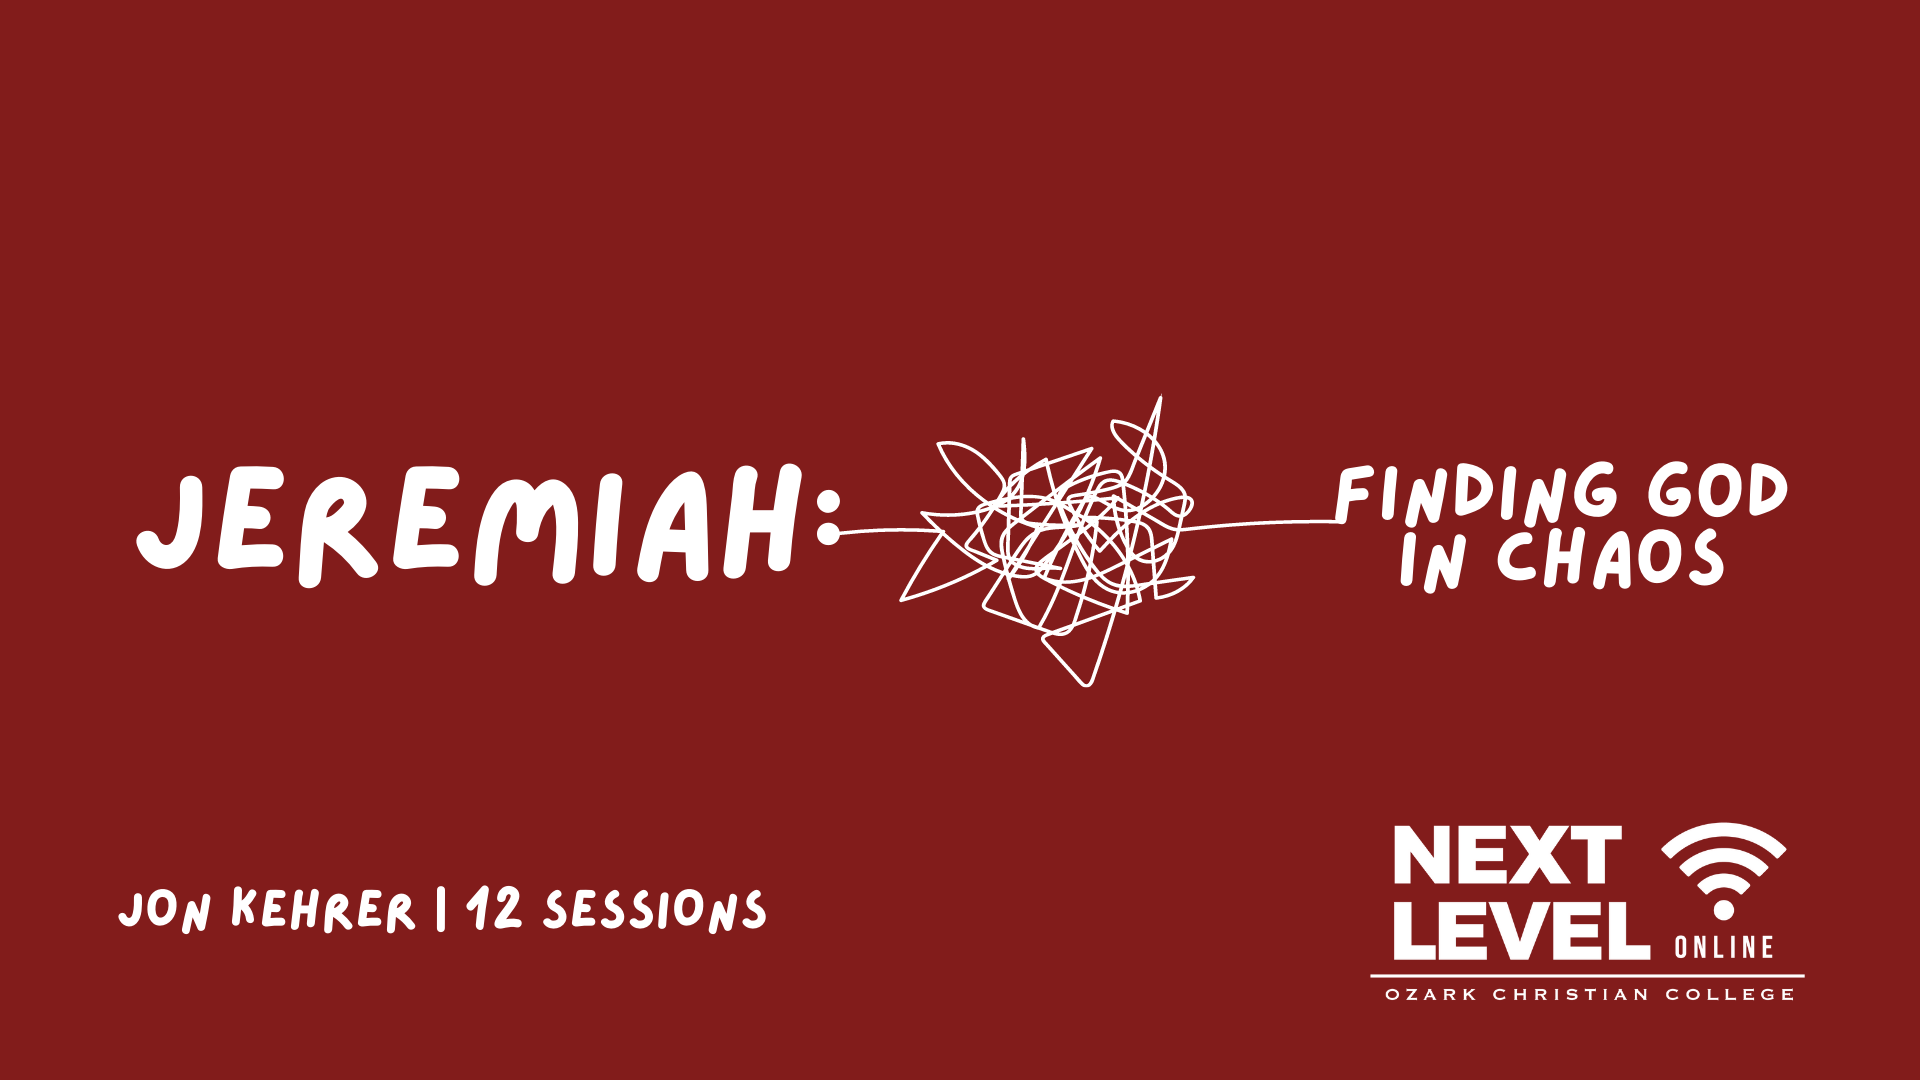 Jeremiah: Finding God in Chaos